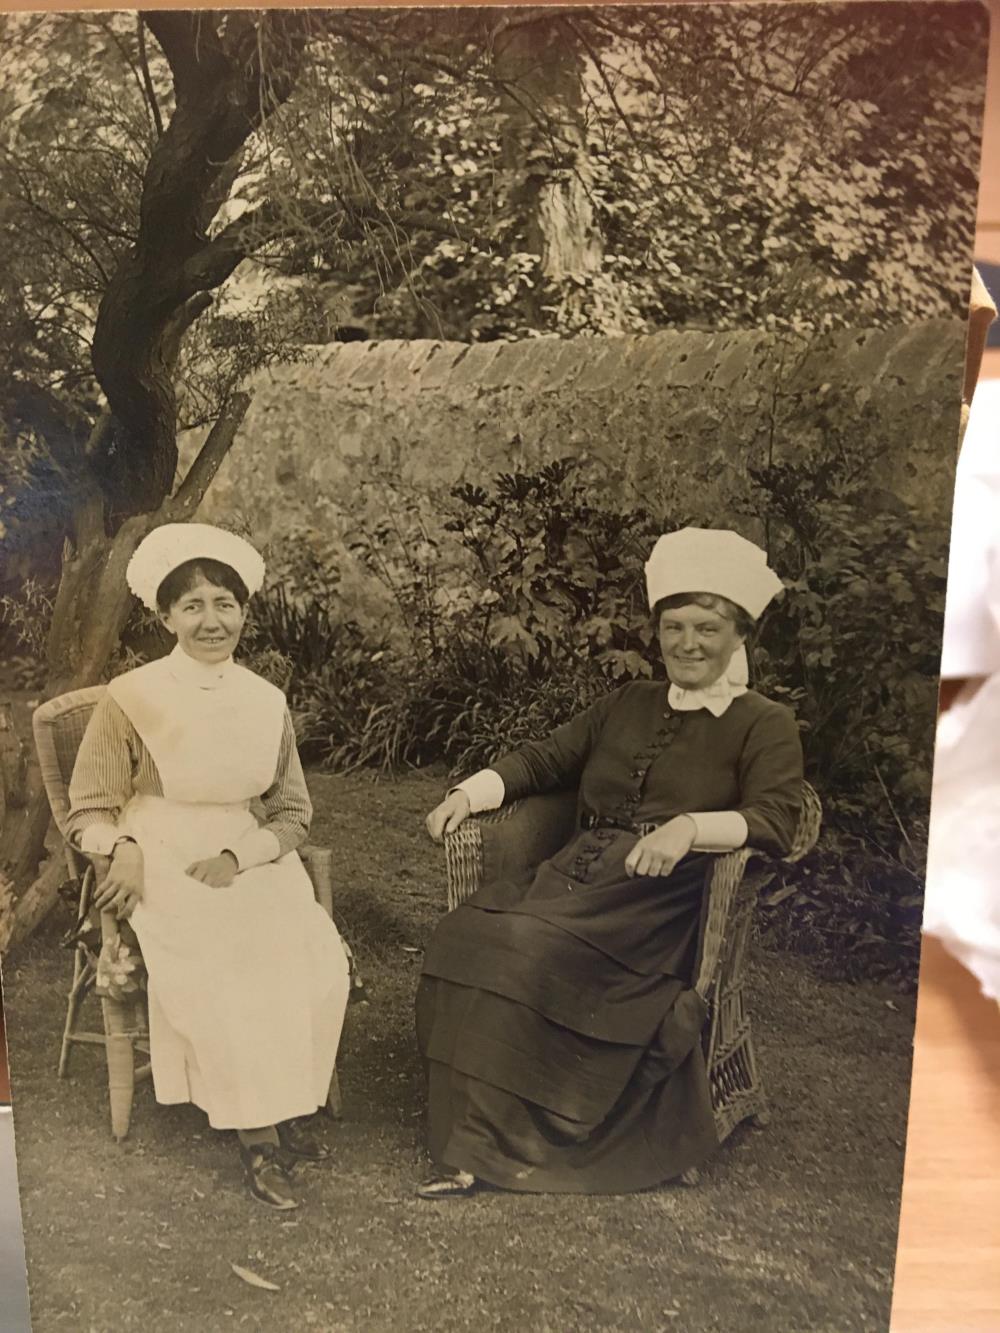 A happy looking sister and nurse sitting on wicker chairs in the garden of Morfa Hall, Rhyl 1921. The once private house became Rhyl Women's Convalescent Home in 1900.